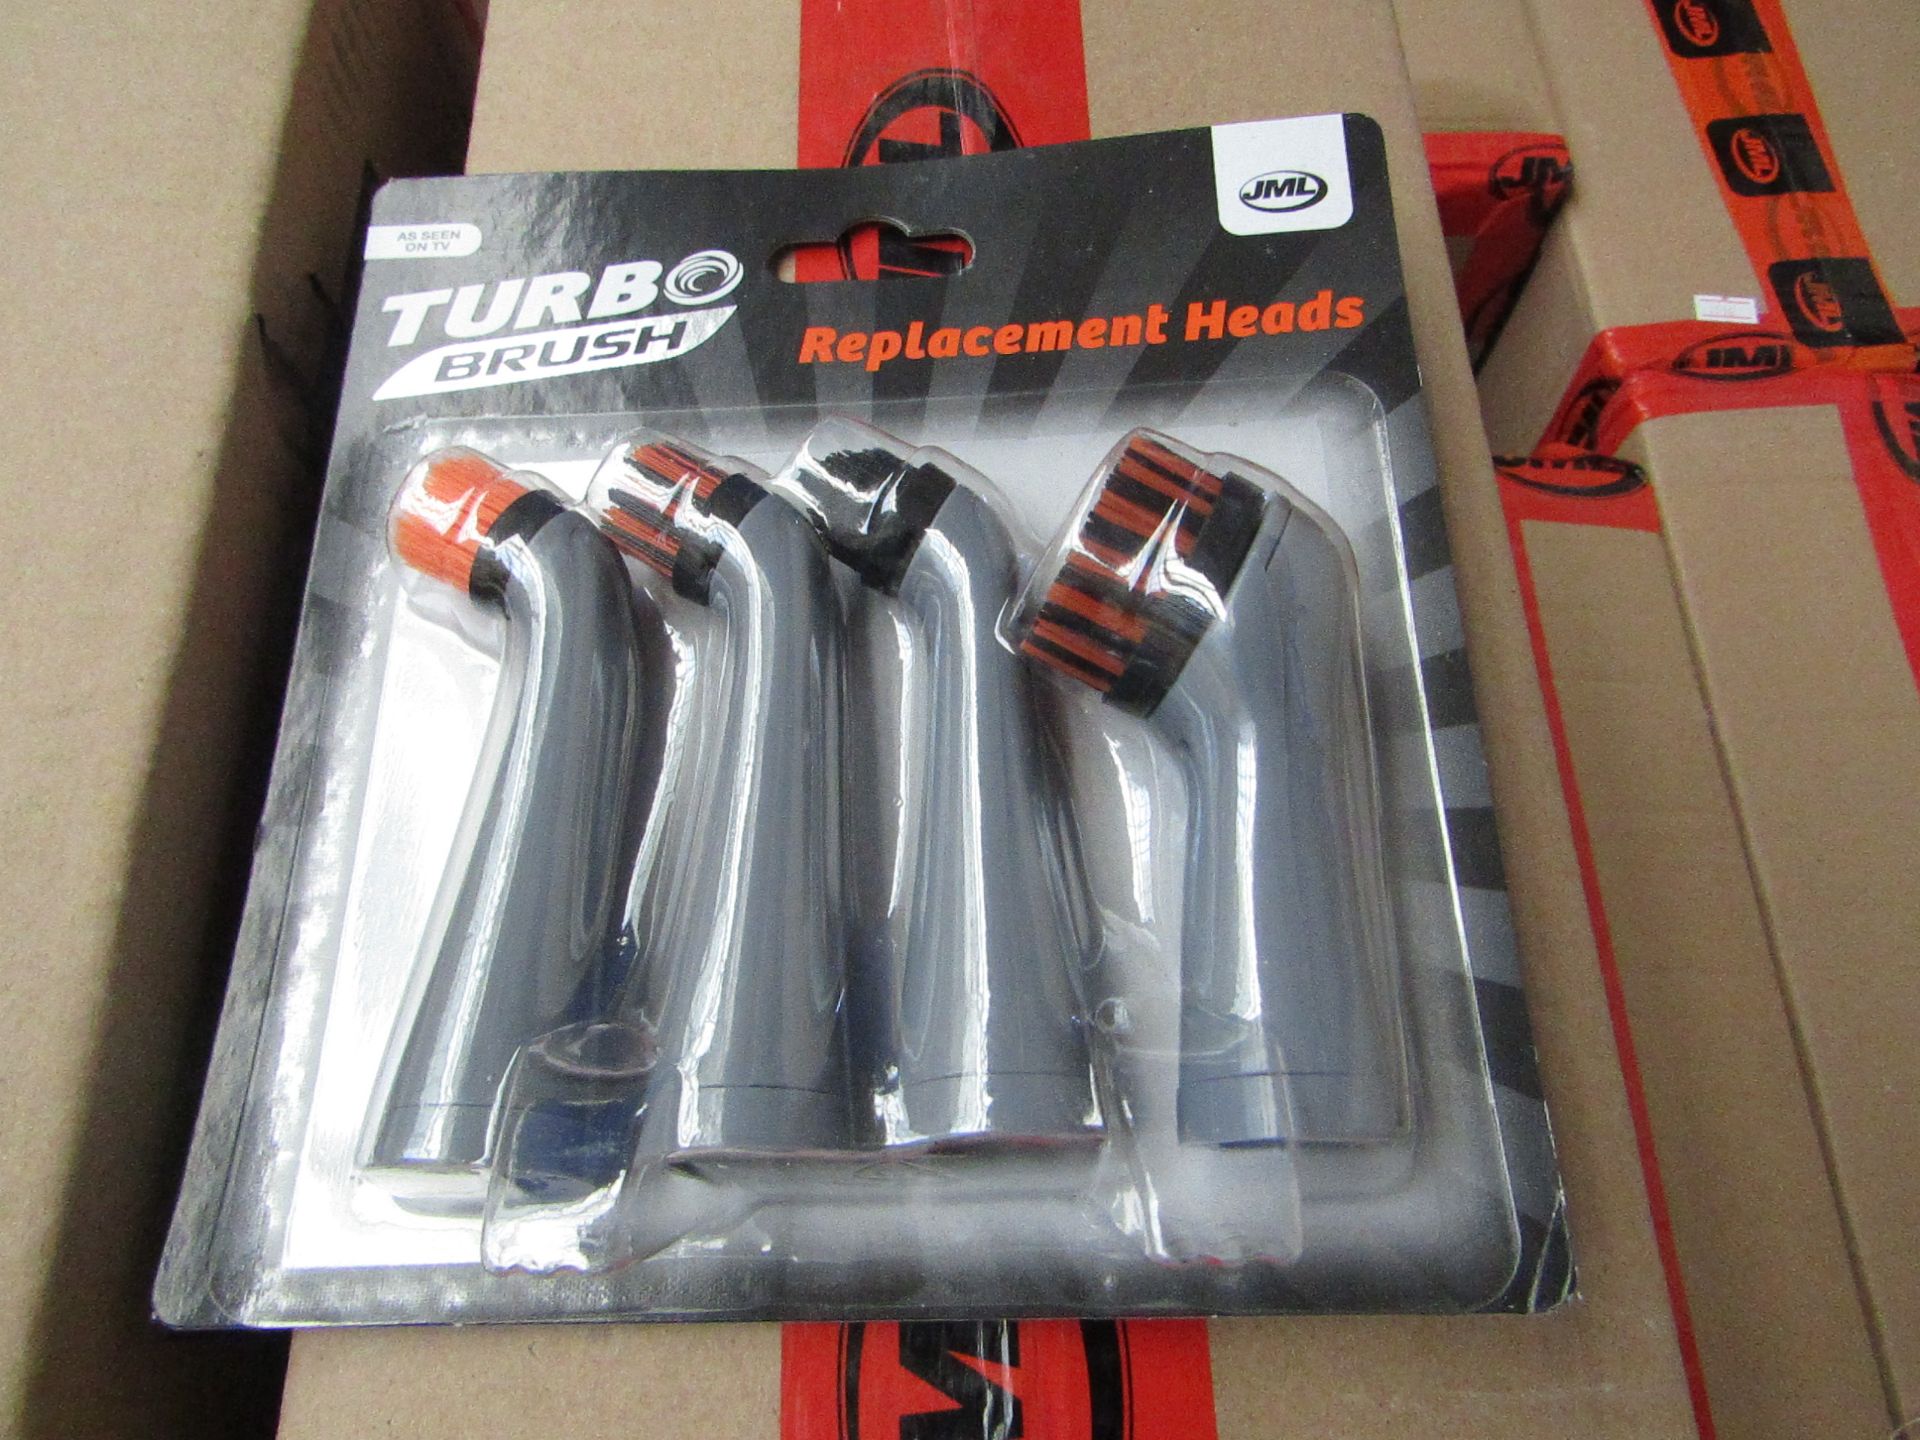 5 X Boxes of 12  JML Turbo brush replacement heads each set contains 4 heads ( thats 240 replacement